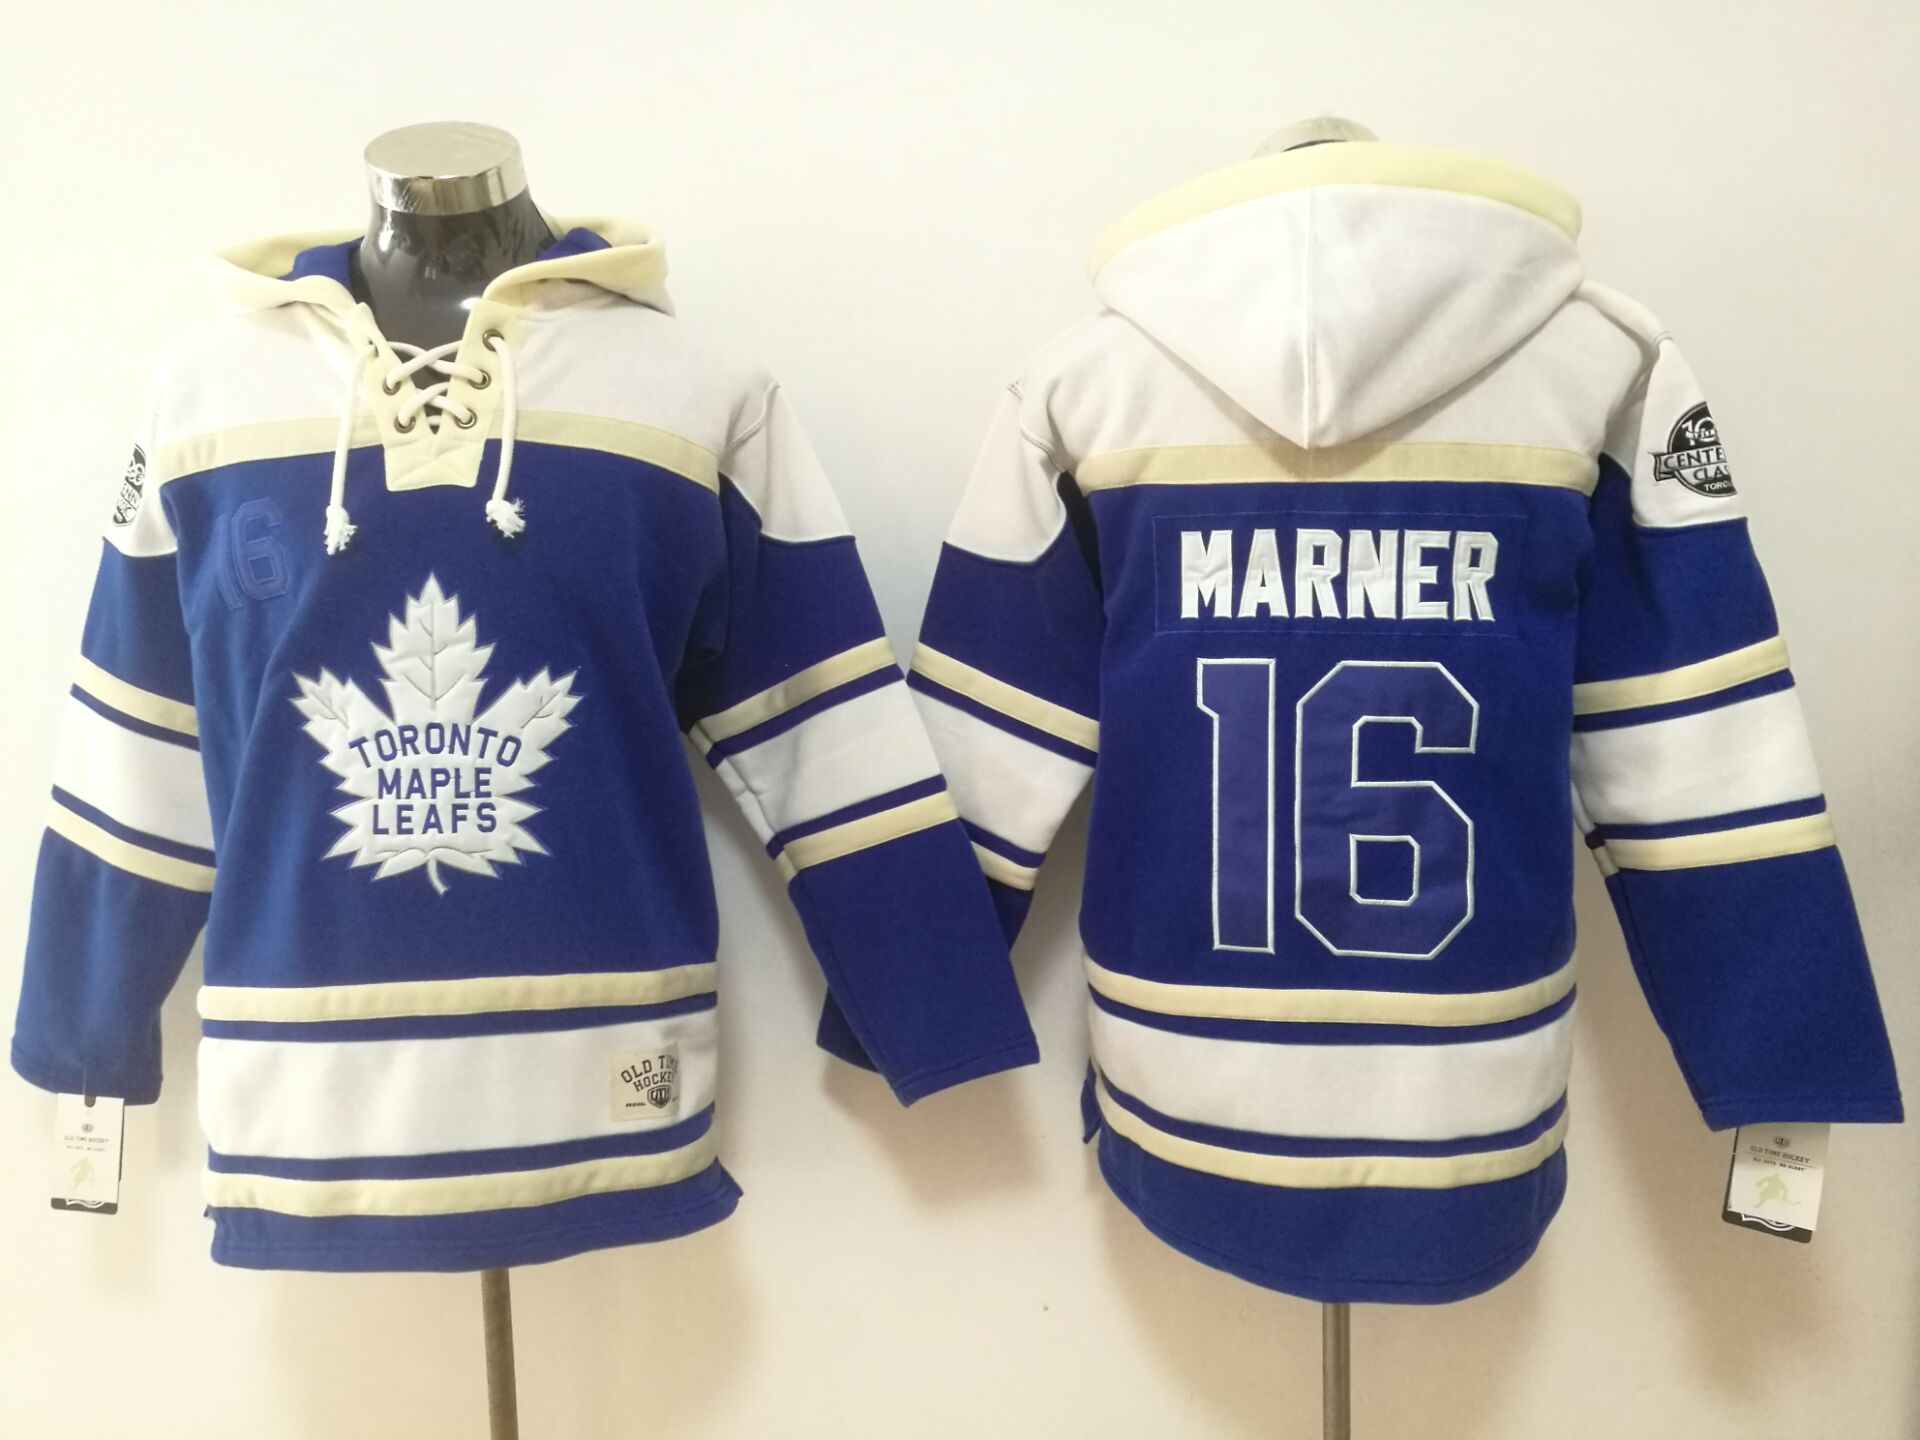 Maple Leafs 16 Mitchell Marner Blue All Stitched Hooded Sweatshirt